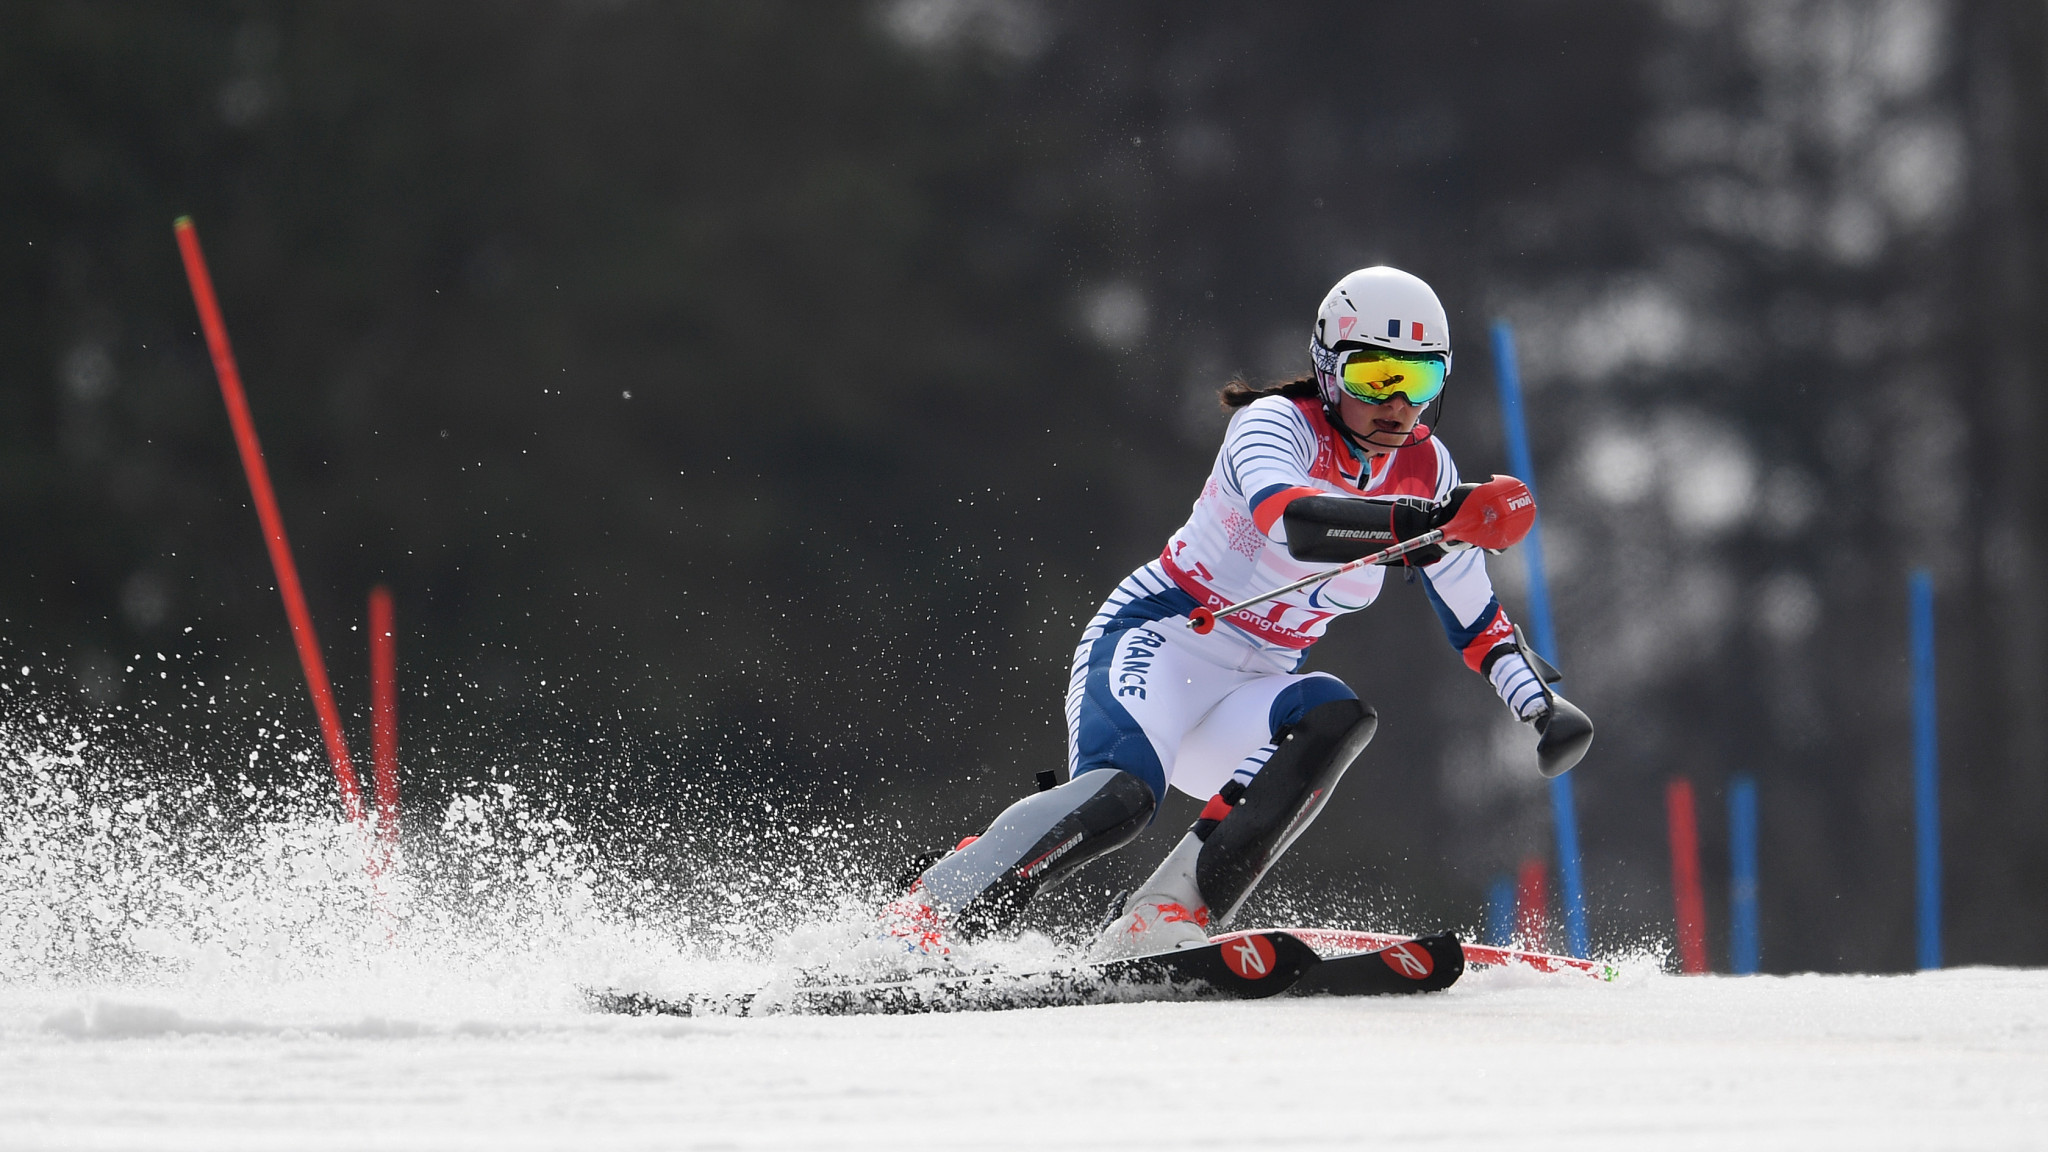 The world's top Para Alpine skiers are set to compete at the event next year ©Getty Images